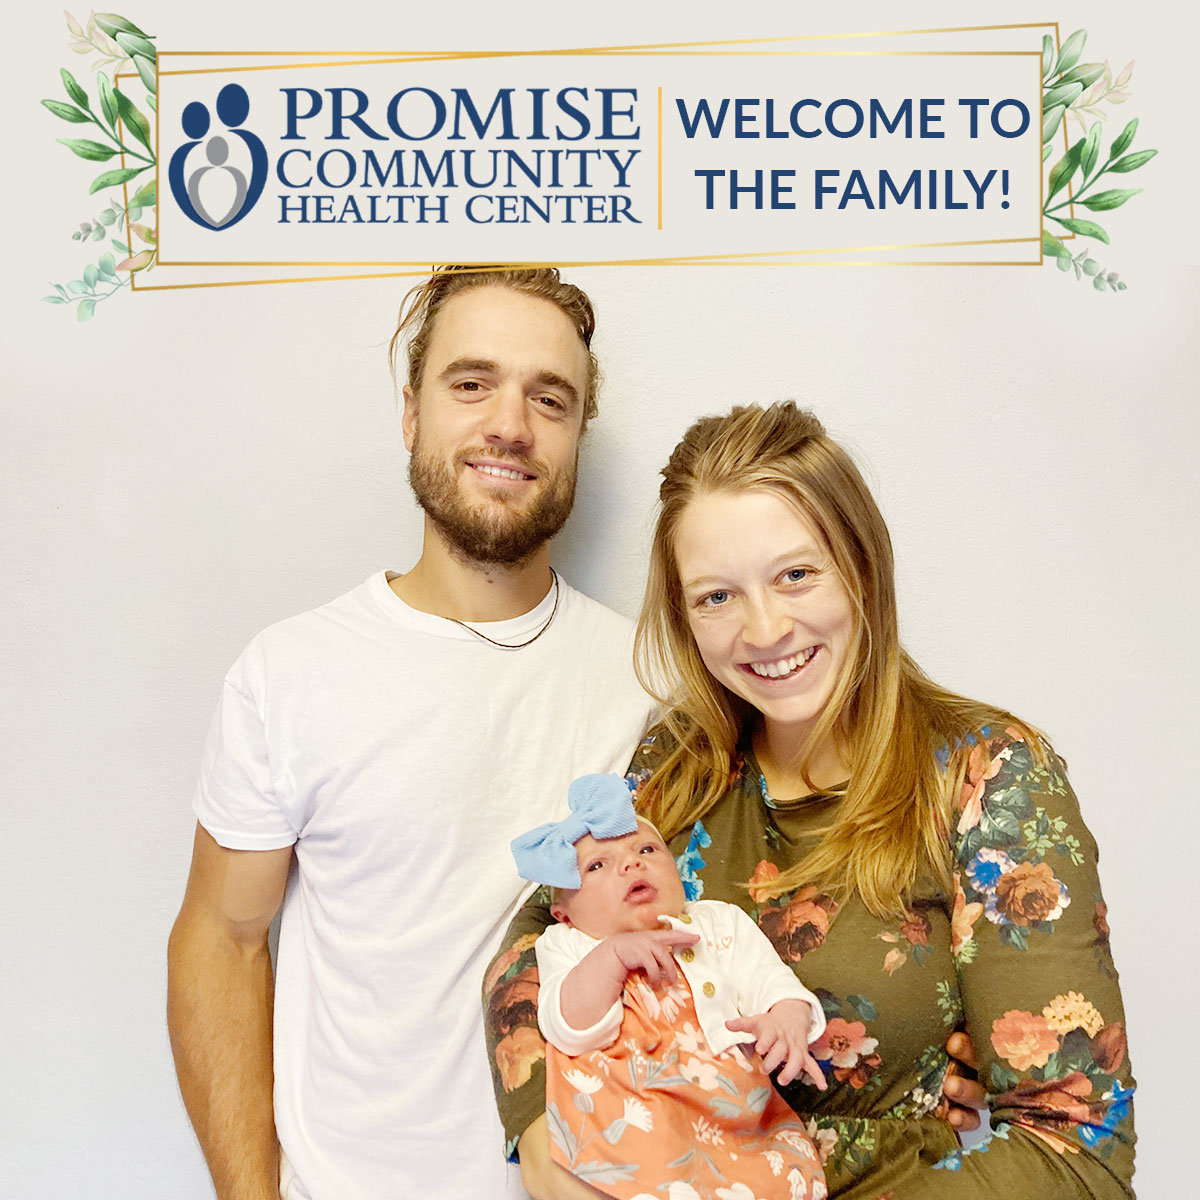 Jonathan and Courtney Ellis Home Birth in Sioux Center, Iowa | Promise Community Health Center in Sioux Center, Iowa | Home births in northwest Iowa, Home births in southeast South Dakota, Home births in southwest Minnesota | Home births in Sioux Falls South Dakota, Home births in Beresford South Dakota, Home births in Sioux City IA, Home births in LeMars IA, Home births in Worthington MN, Home births in Iowa, Home births in South Dakota, Home births in Minnesota